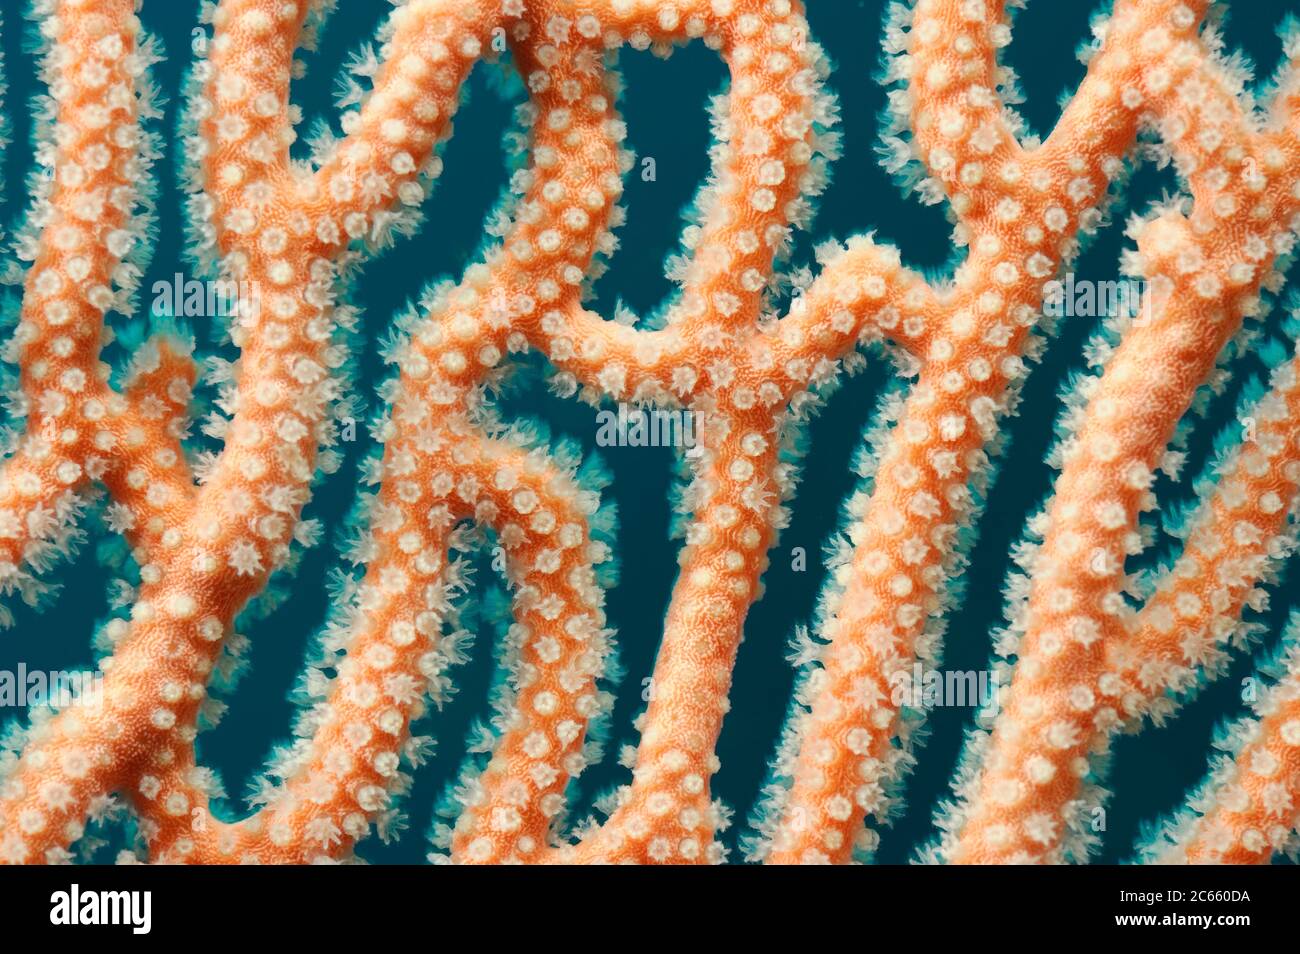 Polyps extended on Fan coral, Raja Ampat, West Papua, Indonesia, Pacific Ocean Stock Photo